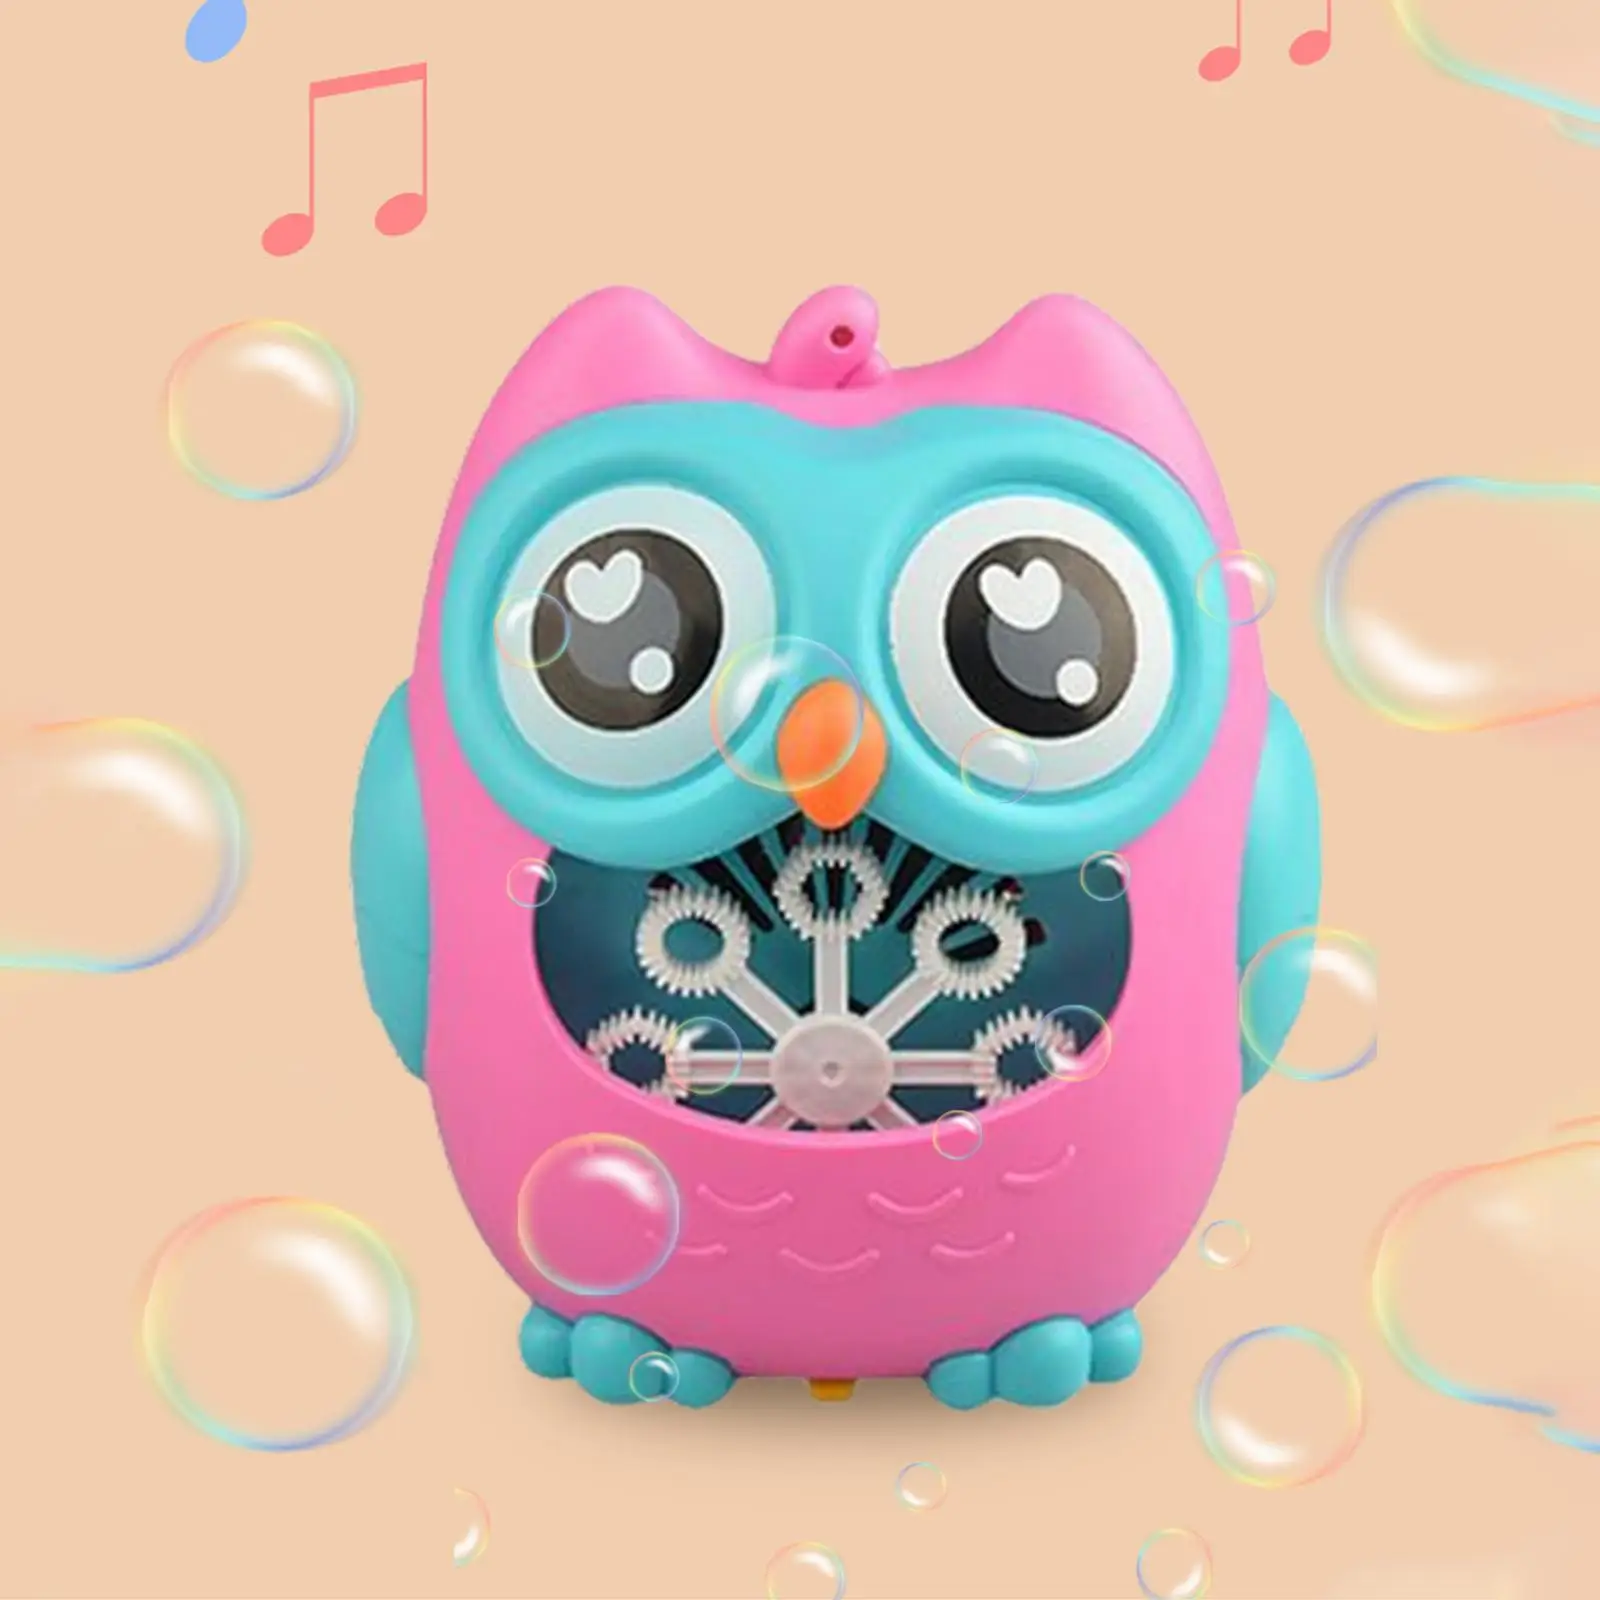 Bubble Blower Set, Summer Toys Owl Octopus Options Automatic Electric Battery